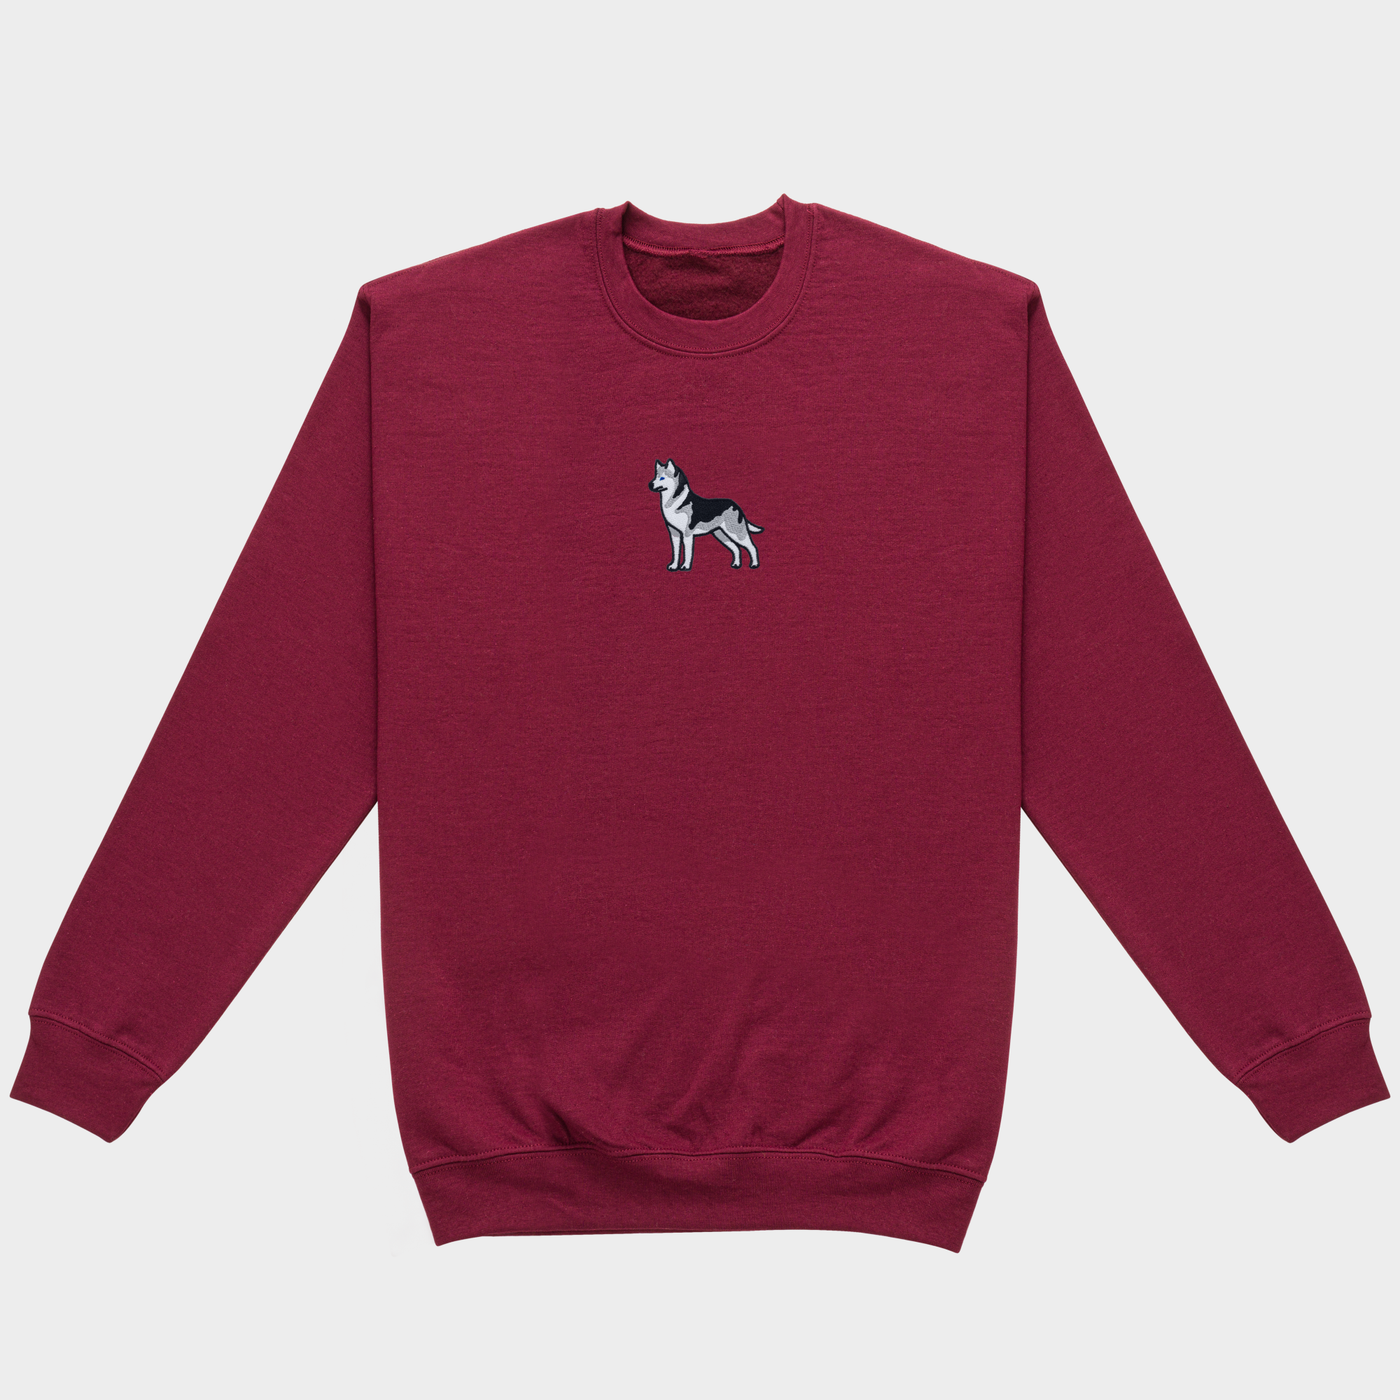 Bobby's Planet Men's Embroidered Siberian Husky Sweatshirt from Paws Dog Cat Animals Collection in Maroon Color#color_maroon